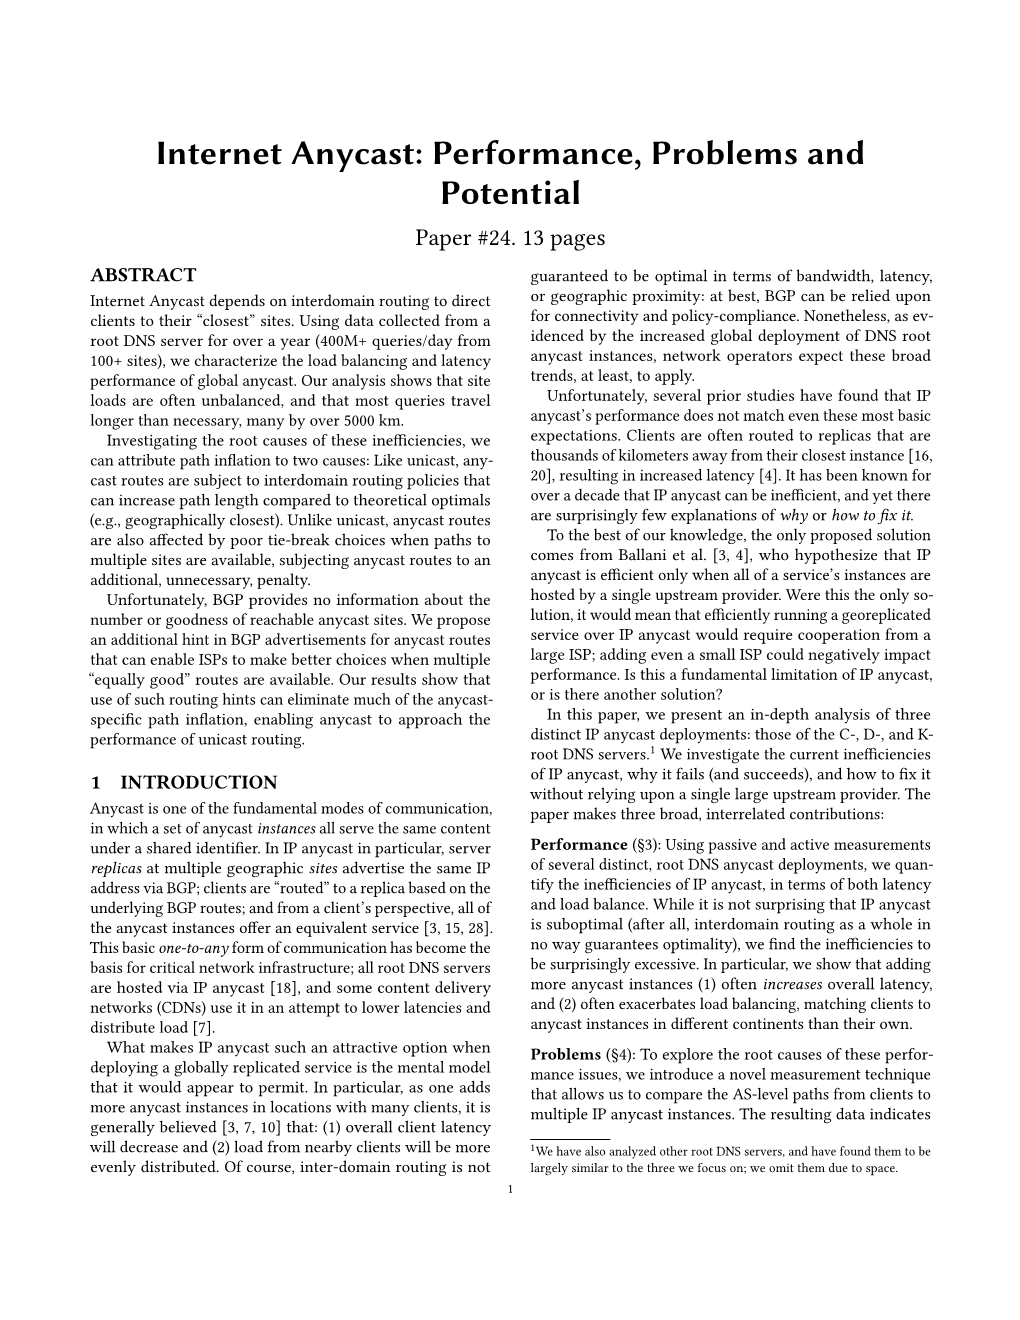 Internet Anycast: Performance, Problems and Potential Paper #24